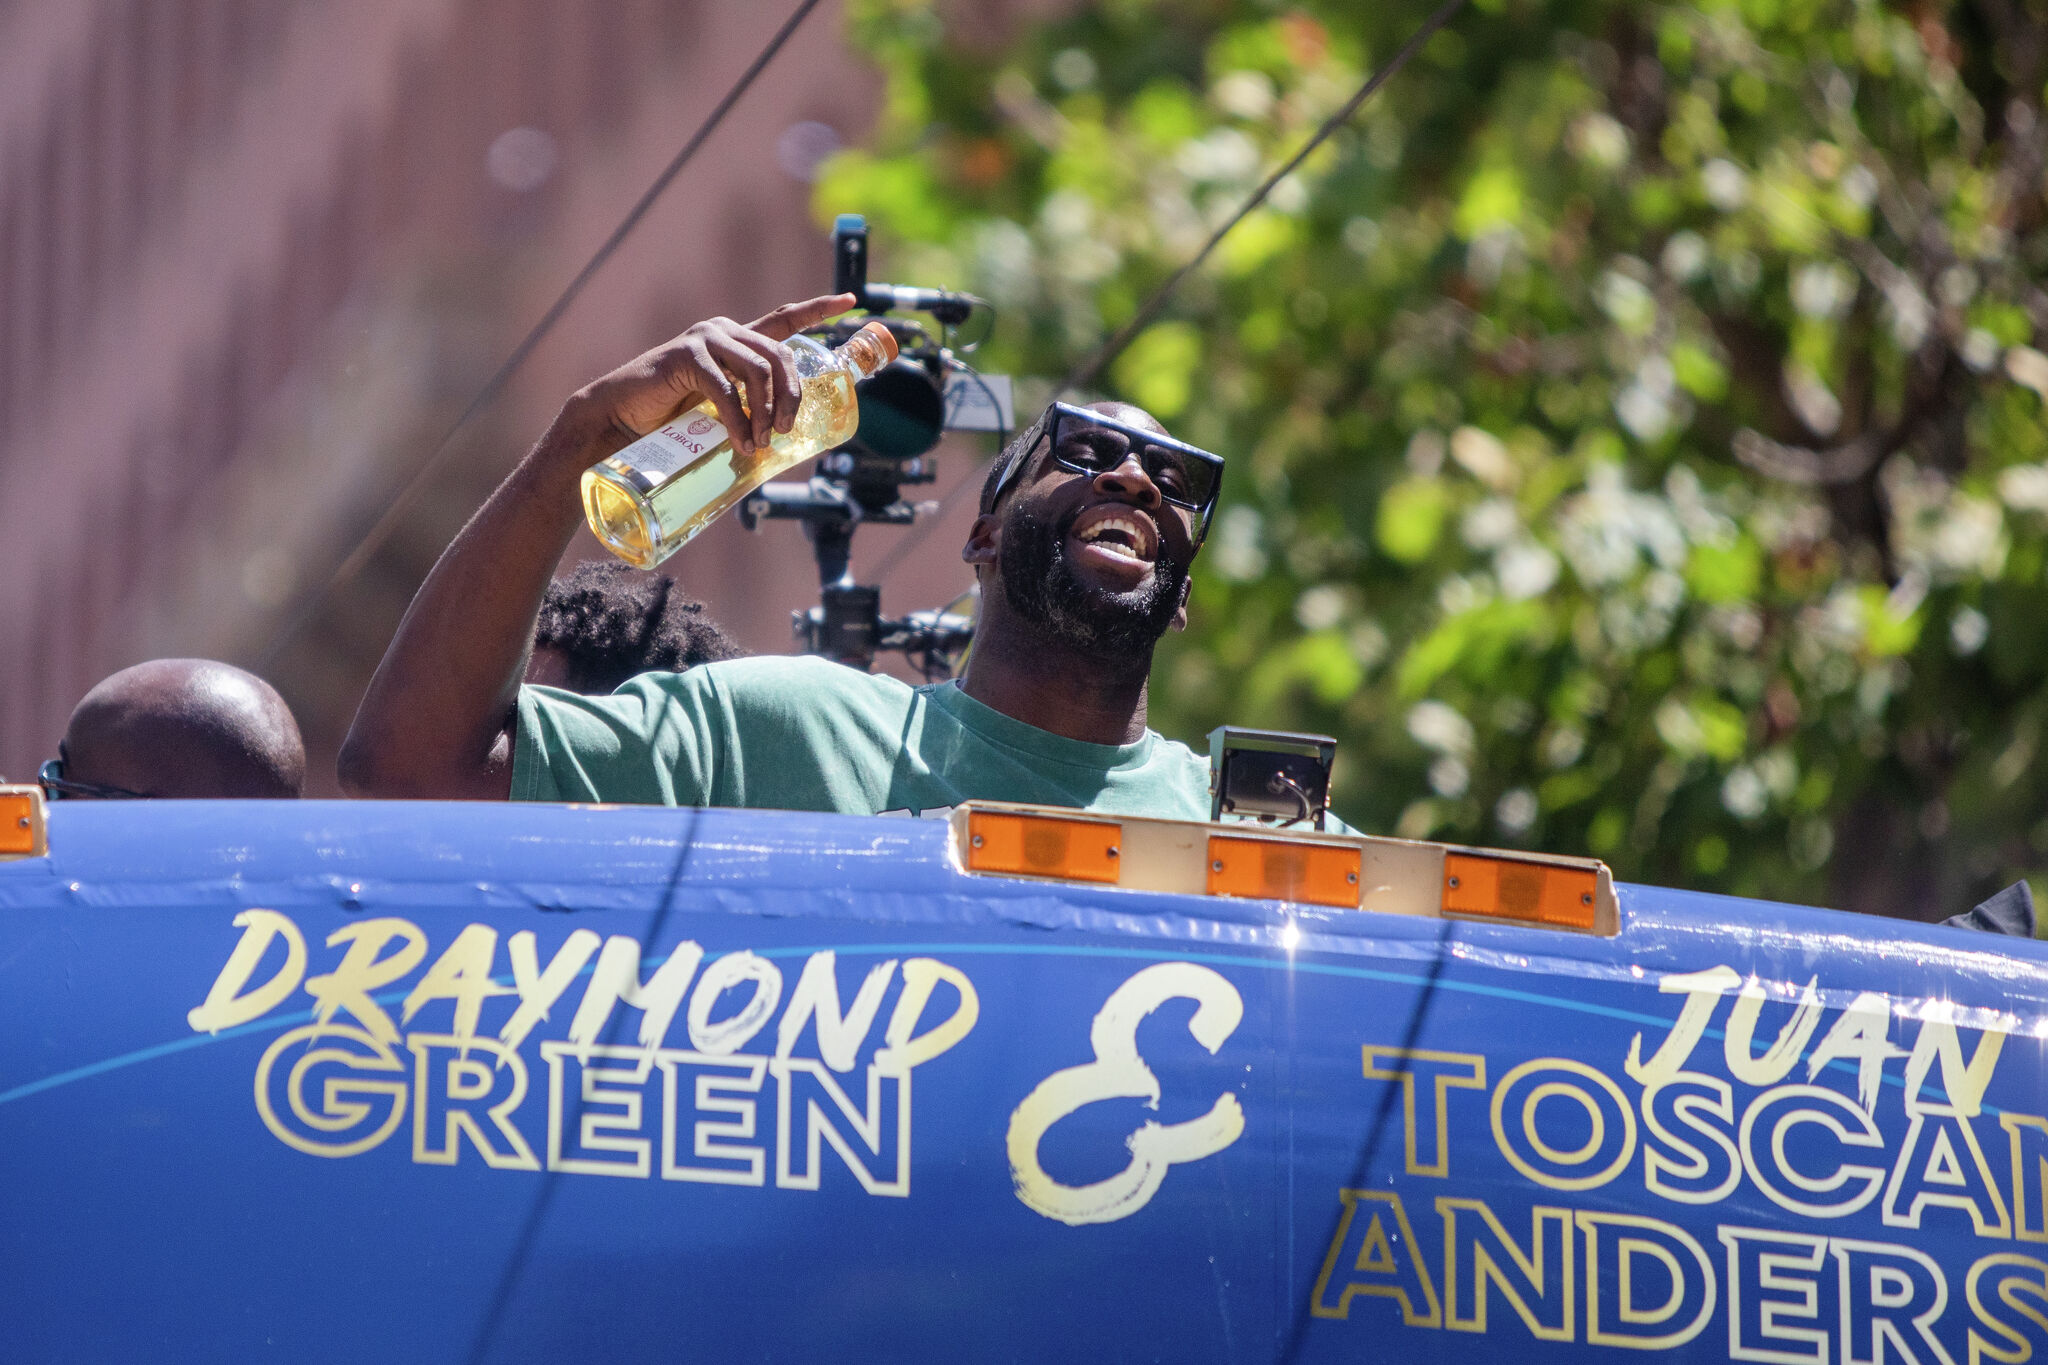 Warriors Parade: Green livens up otherwise tame title celebration